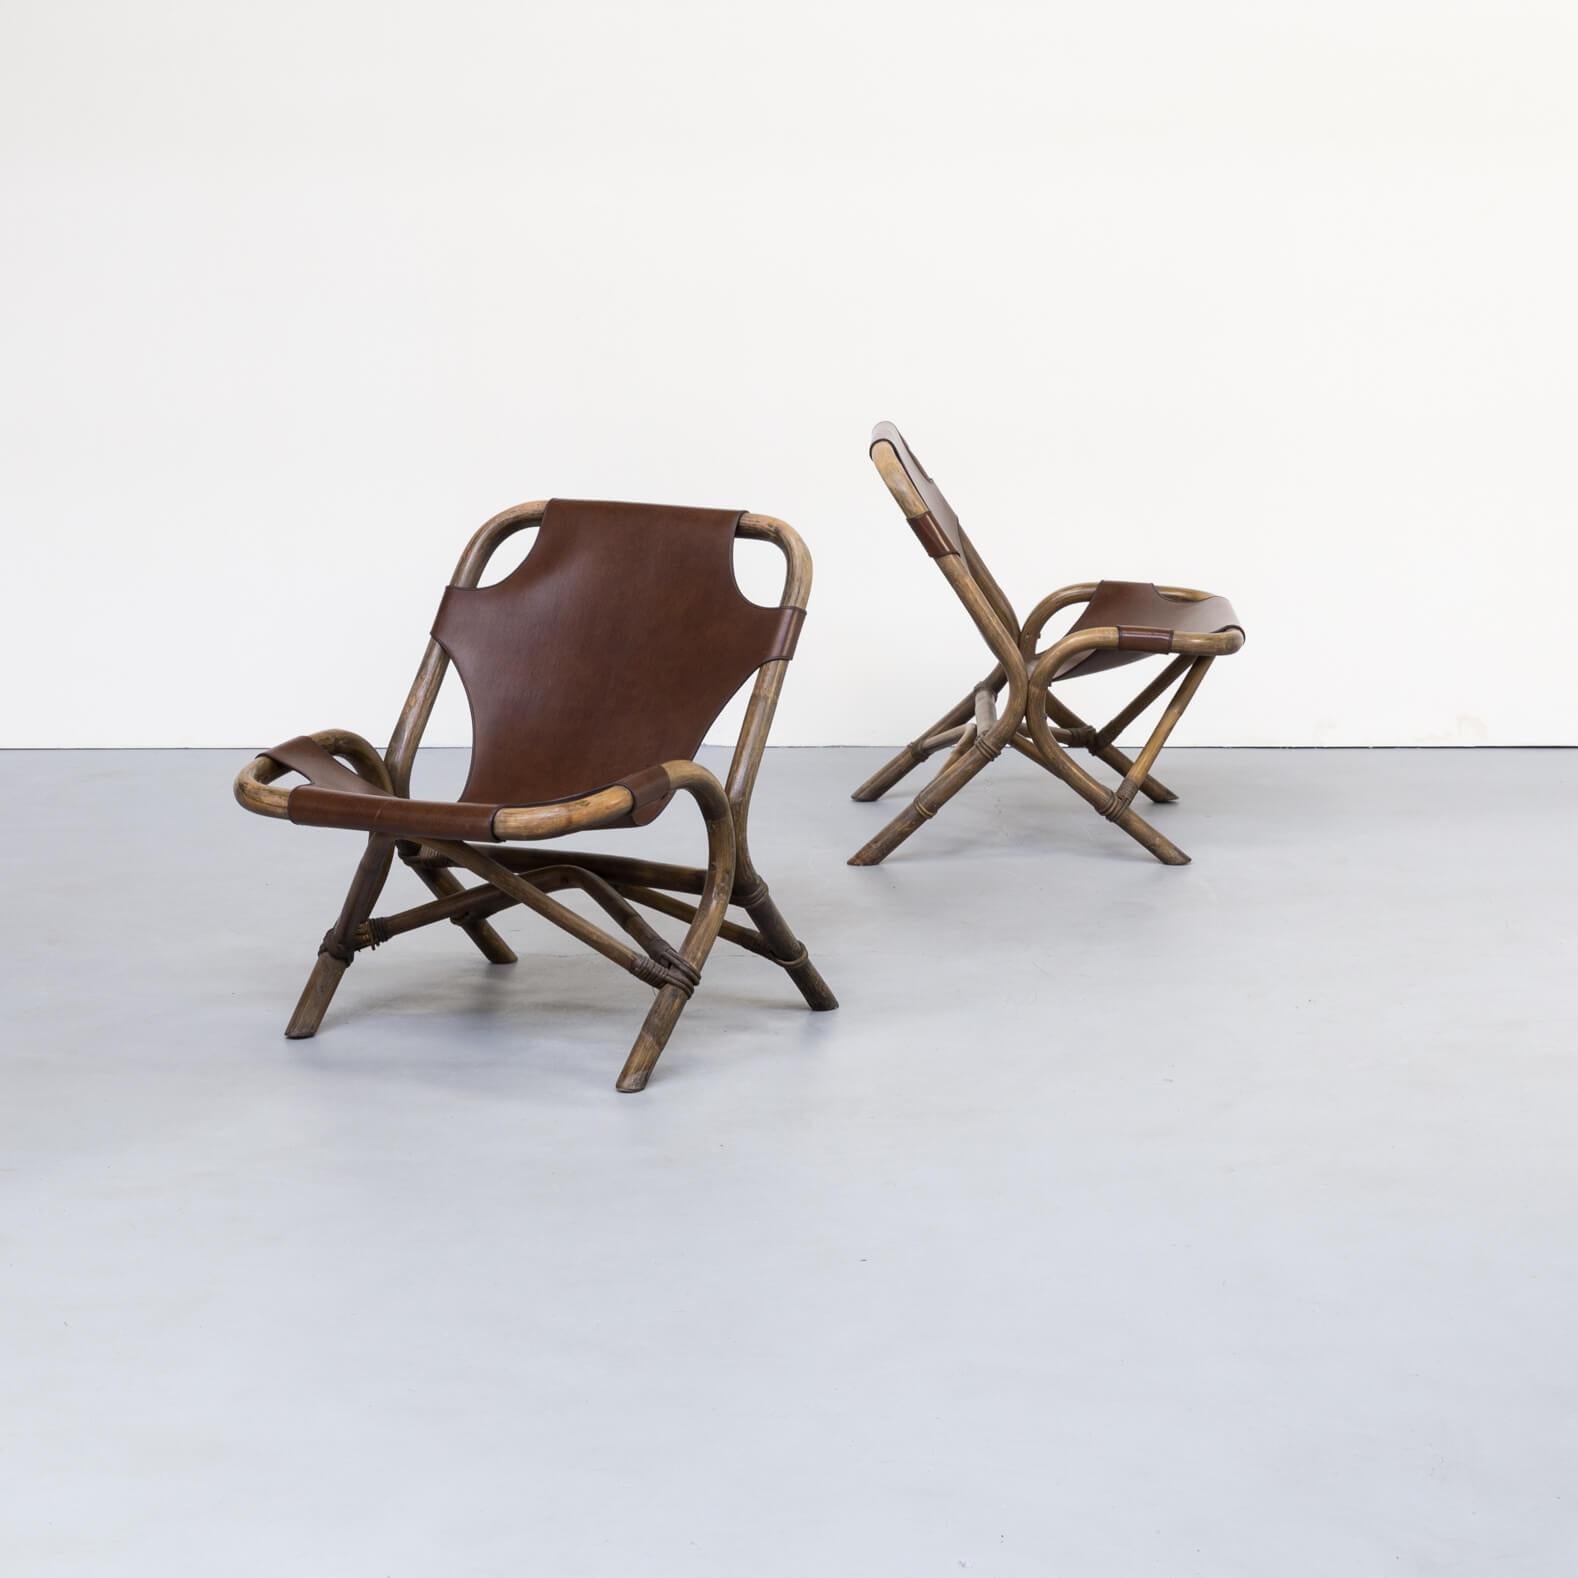 1980s Skai leather lounge chairs, bamboo frame. Nice set of two identical bamboo framed lounge chairs with strong Skai leather saddle seating. Relatively lightweight chairs with comfortable seat. Good condition consistent with age and use.